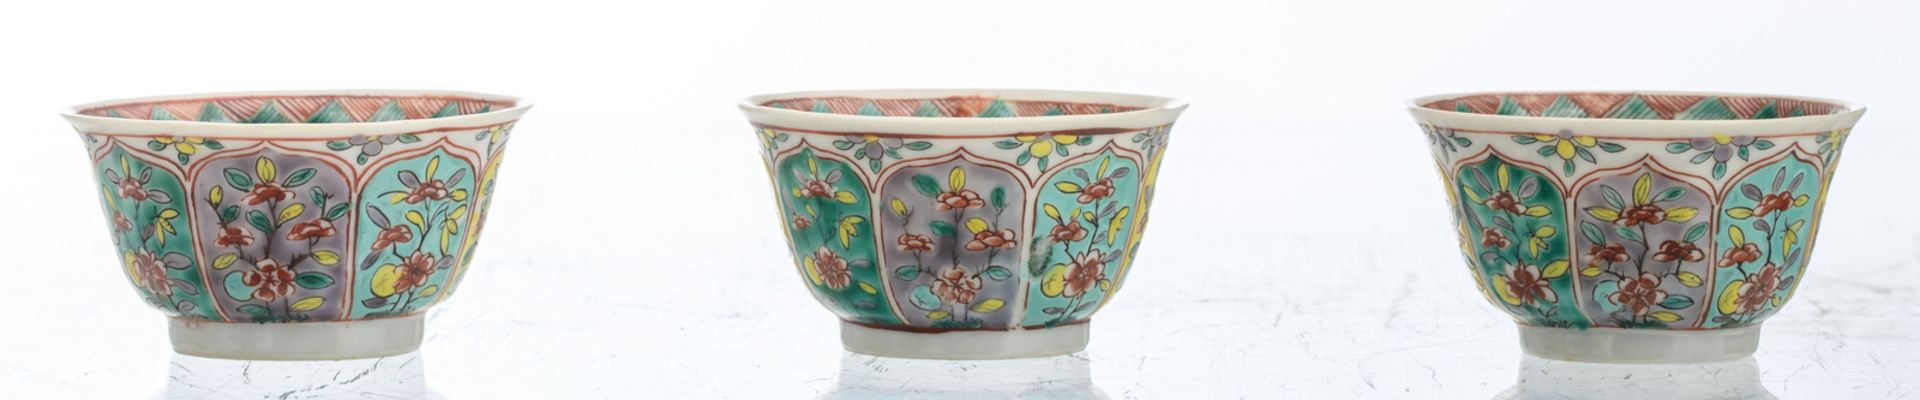 Six Chinese polychrome floral decorated cups and saucers, 18thC, H 2 - 5 cm - Image 9 of 9